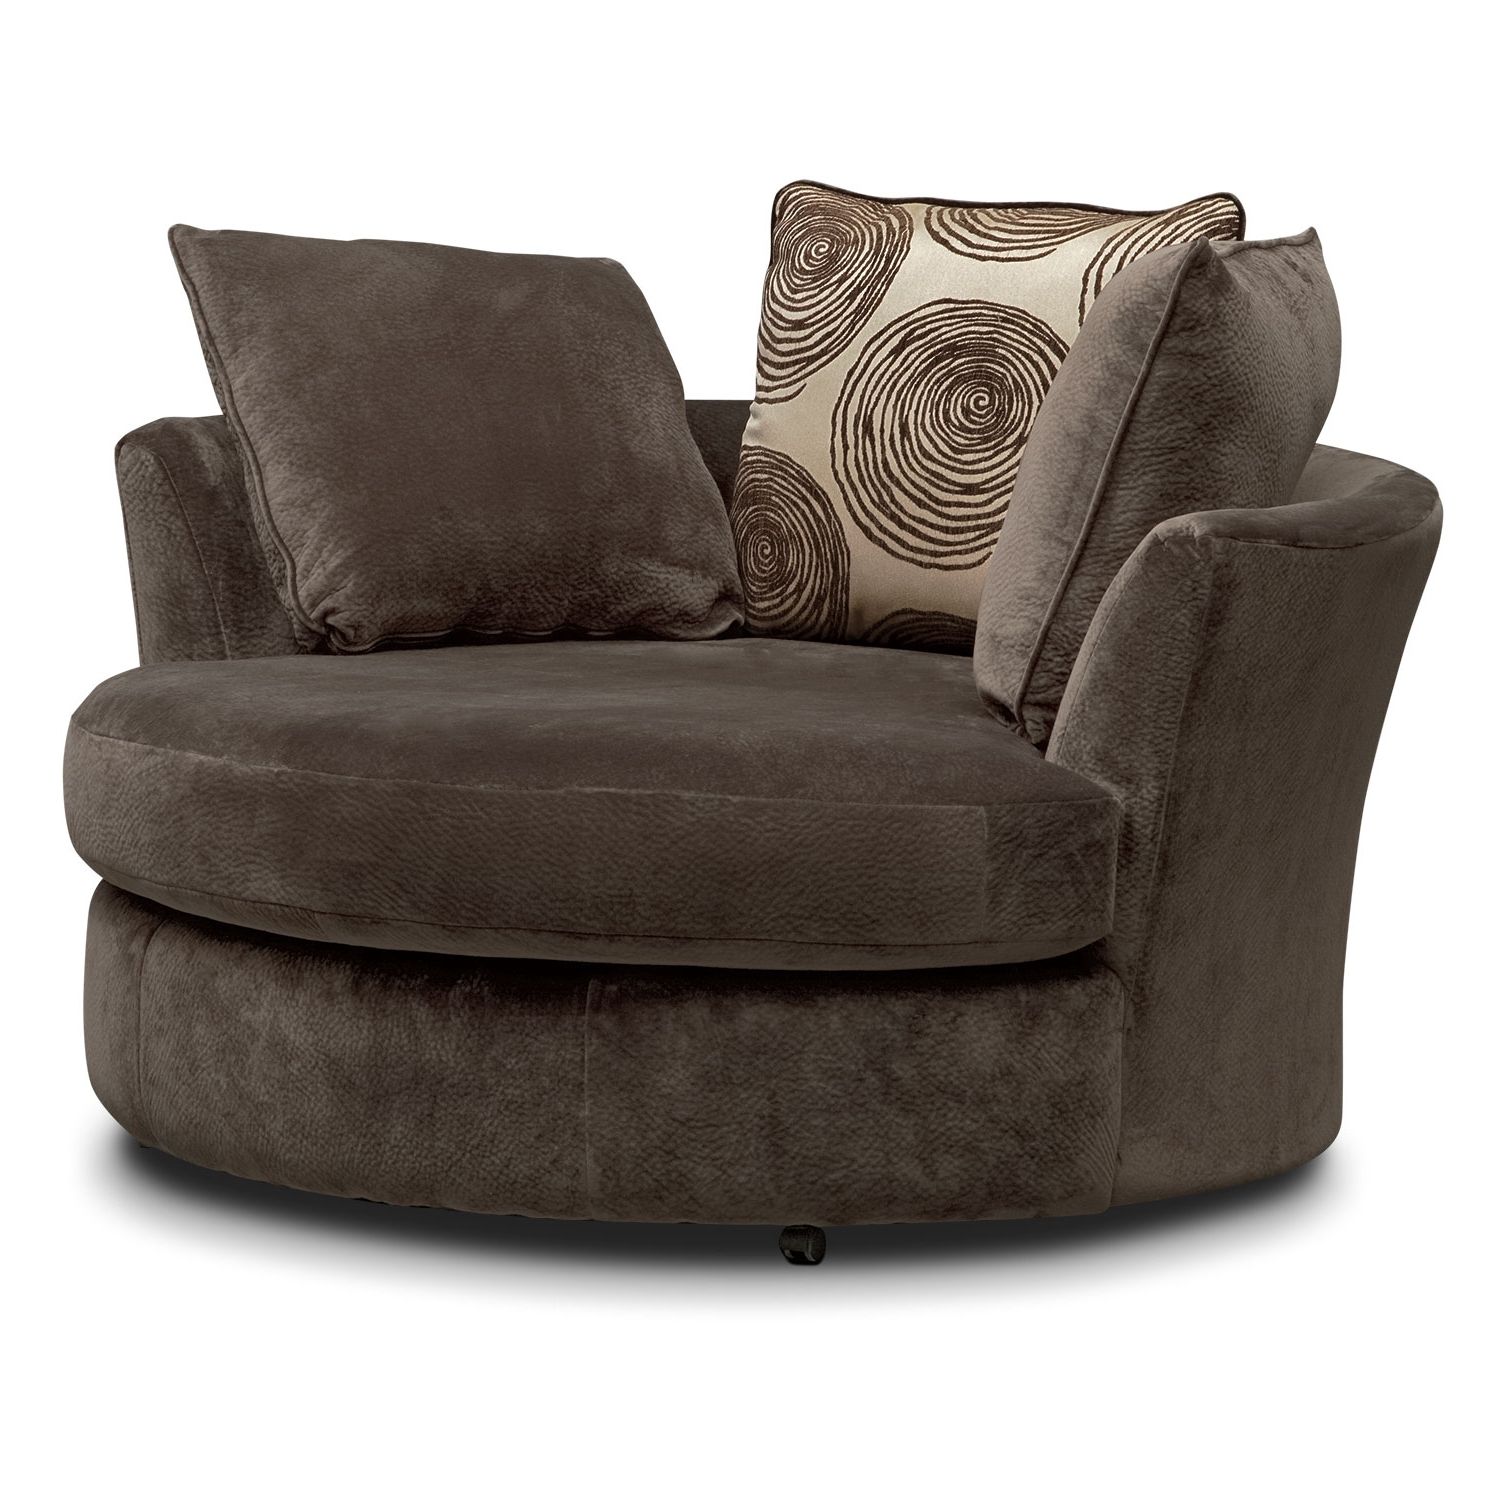 Sofas With Swivel Chair With Best And Newest Cordelle Sofa And Swivel Chair Set – Chocolate (View 1 of 20)